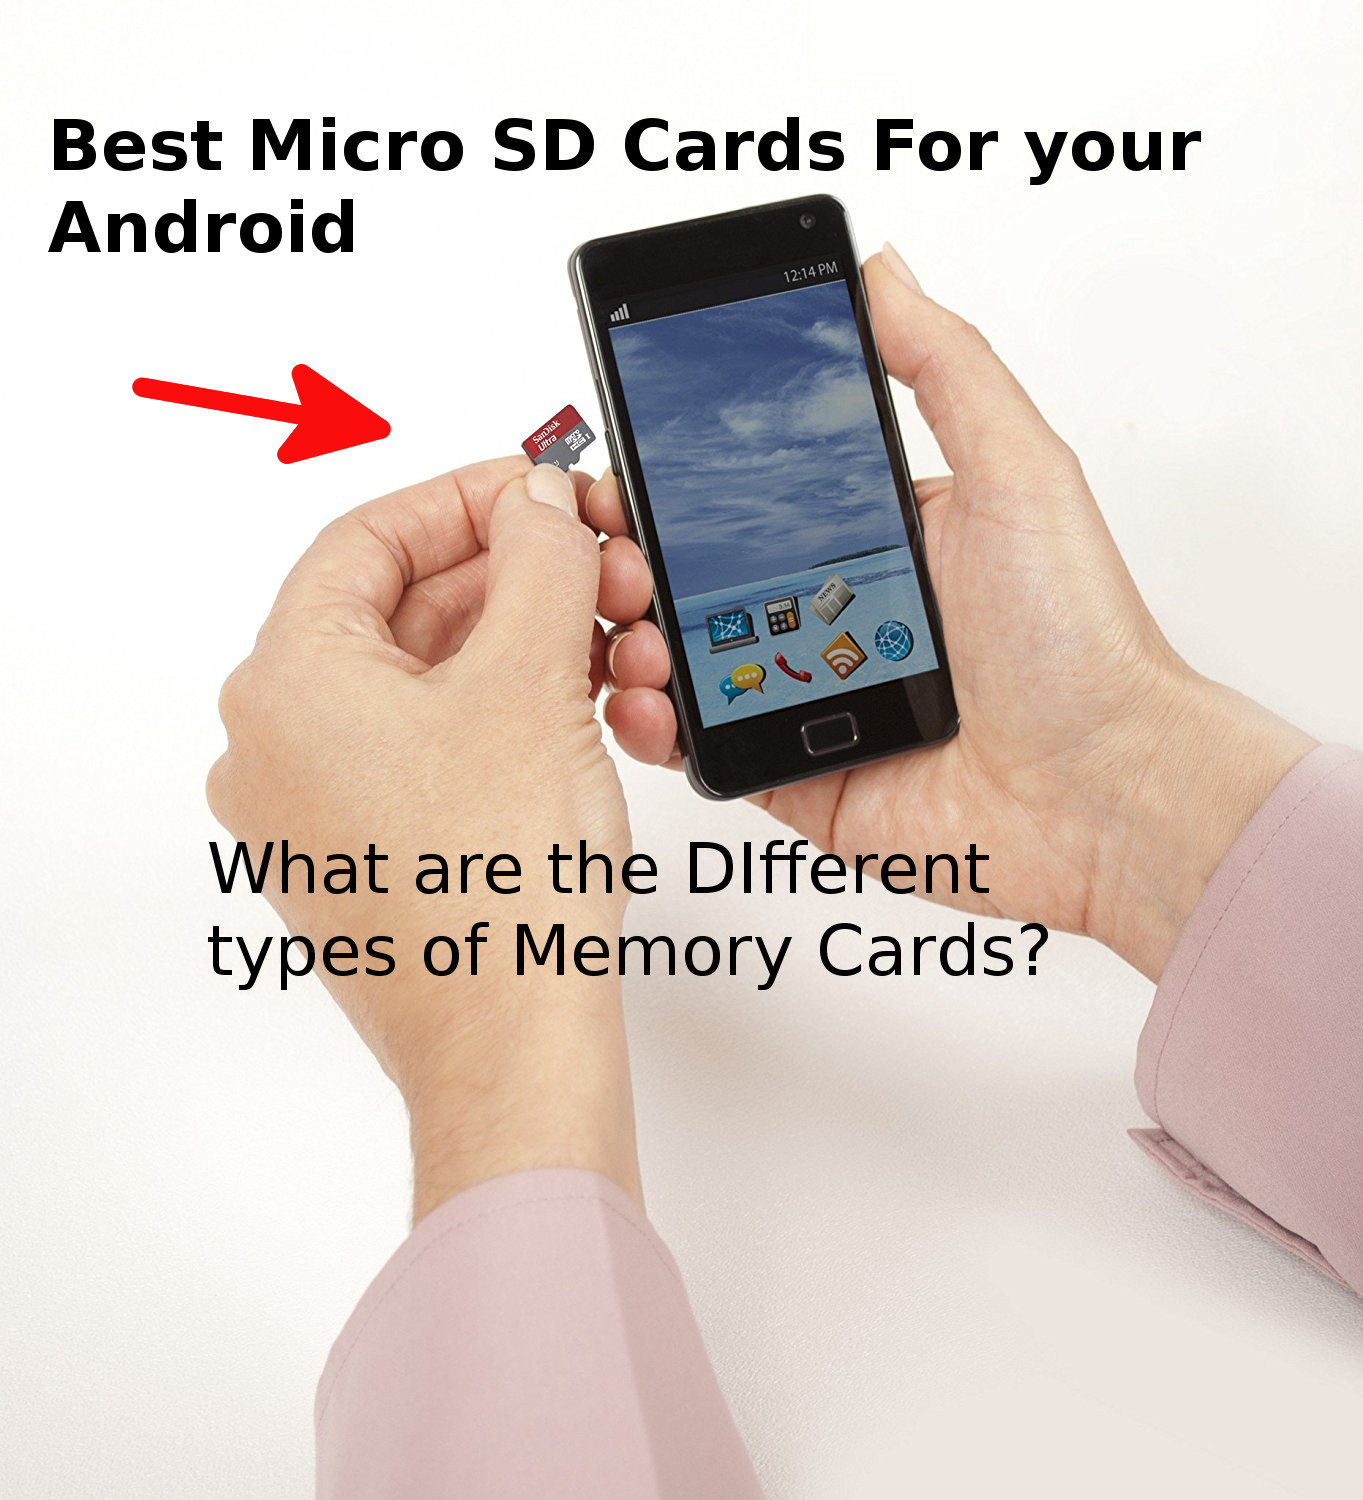 Best Micro SD cards for Android